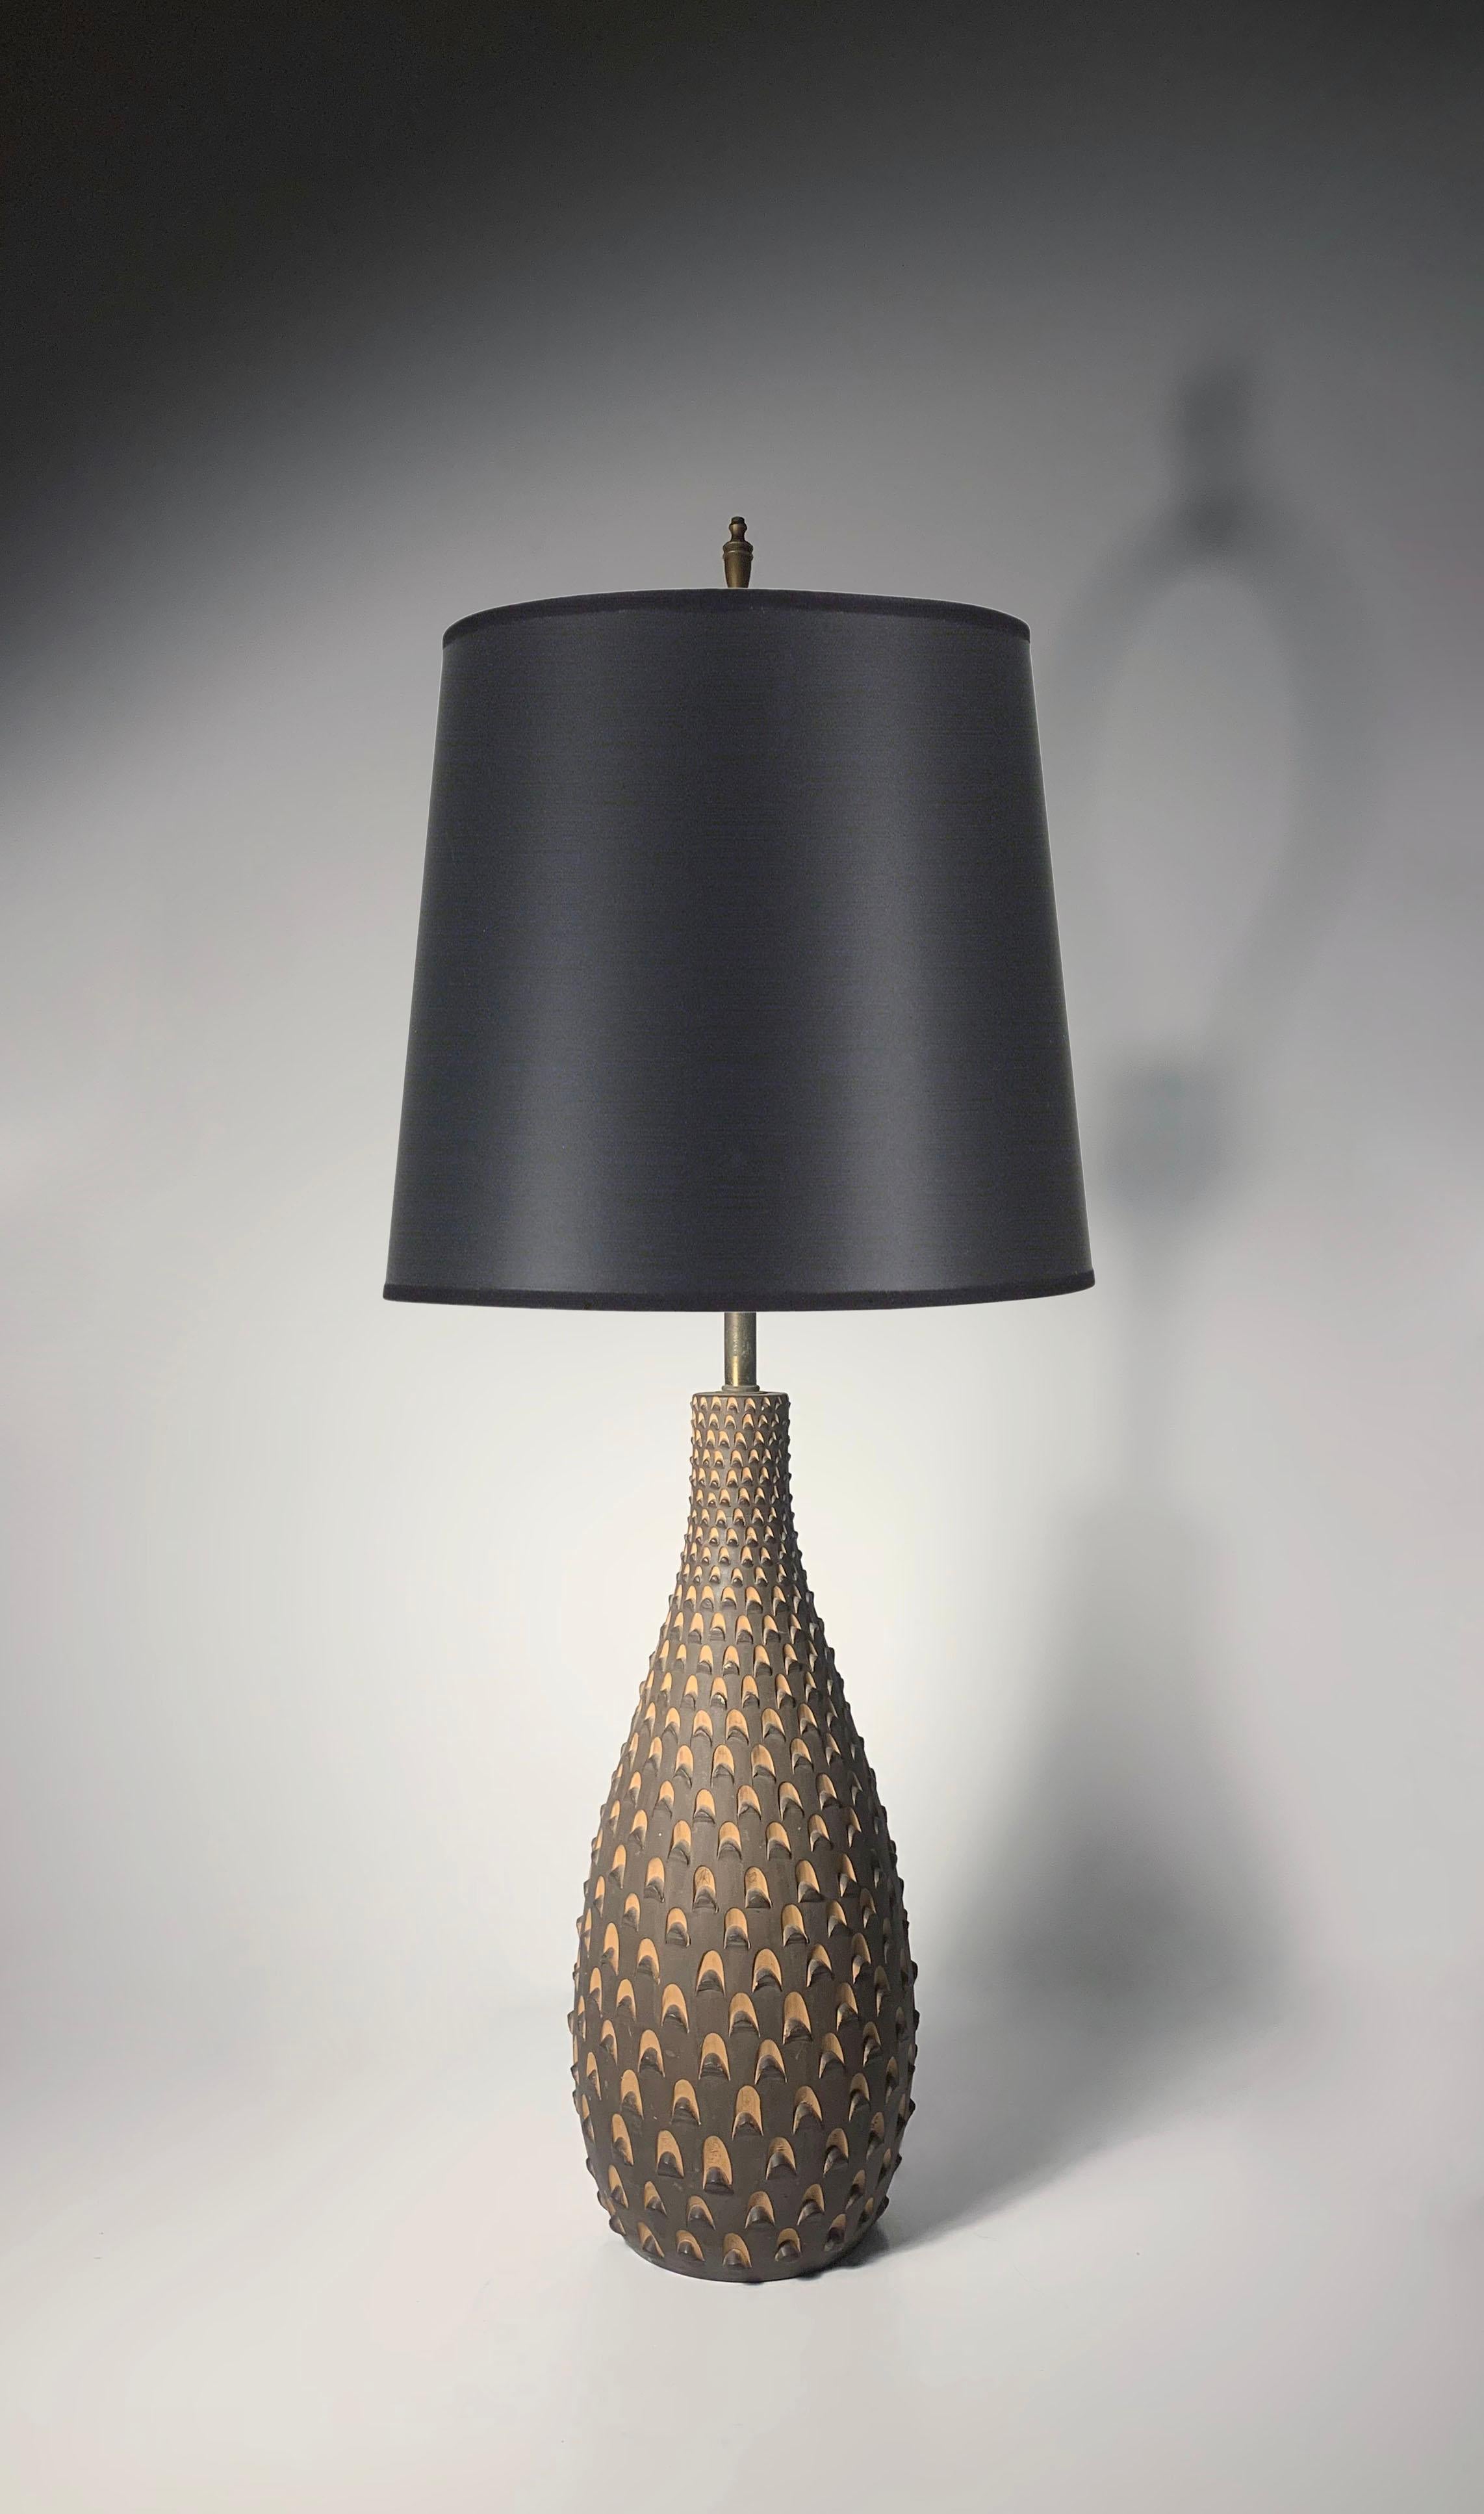 Pair of Vintage Modern Pottery Pinecone Lamps by Raymor

Signed on bottom Raymor Italy. Uncertain to the artist. Possibly Aldo Londi , Ugo Zaccagnini or Fantoni.

minor vintage wear. overall quite nice. One of the lamps the black color is